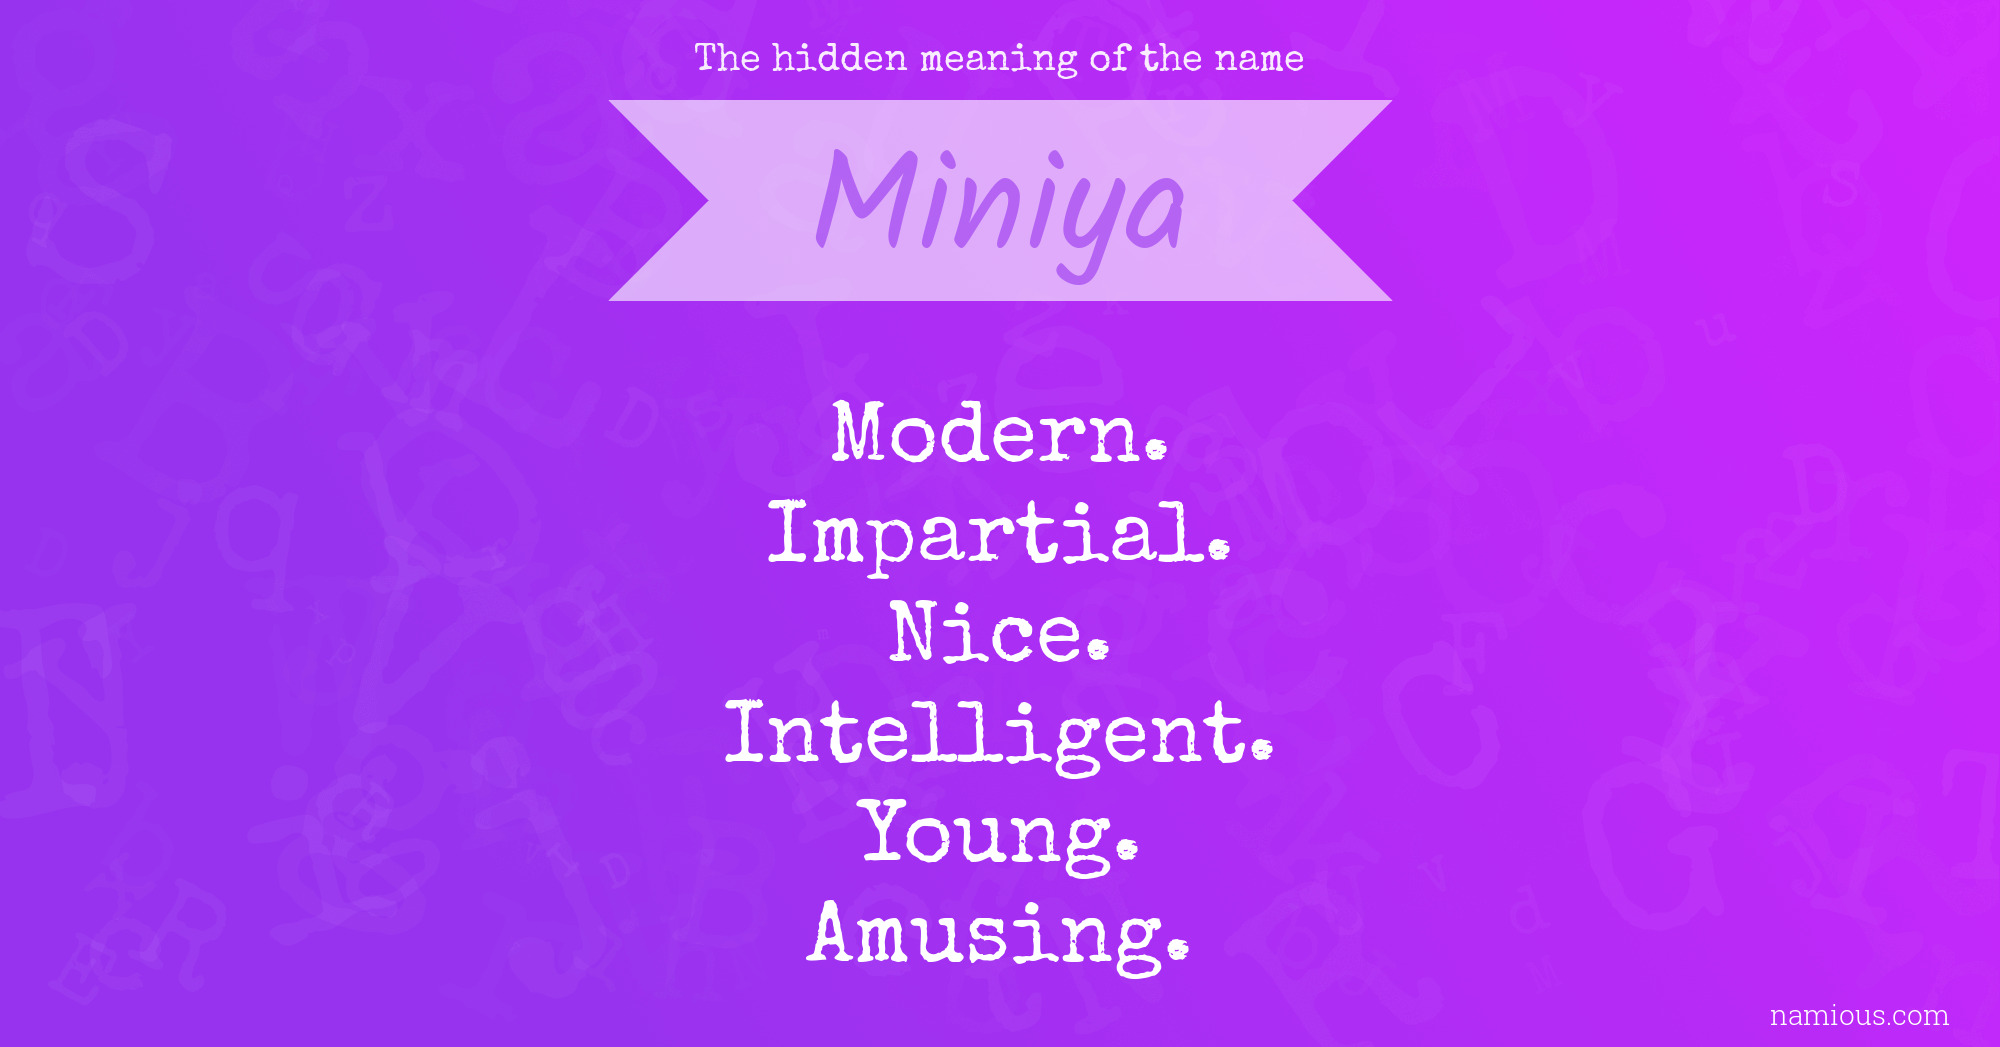 The hidden meaning of the name Miniya